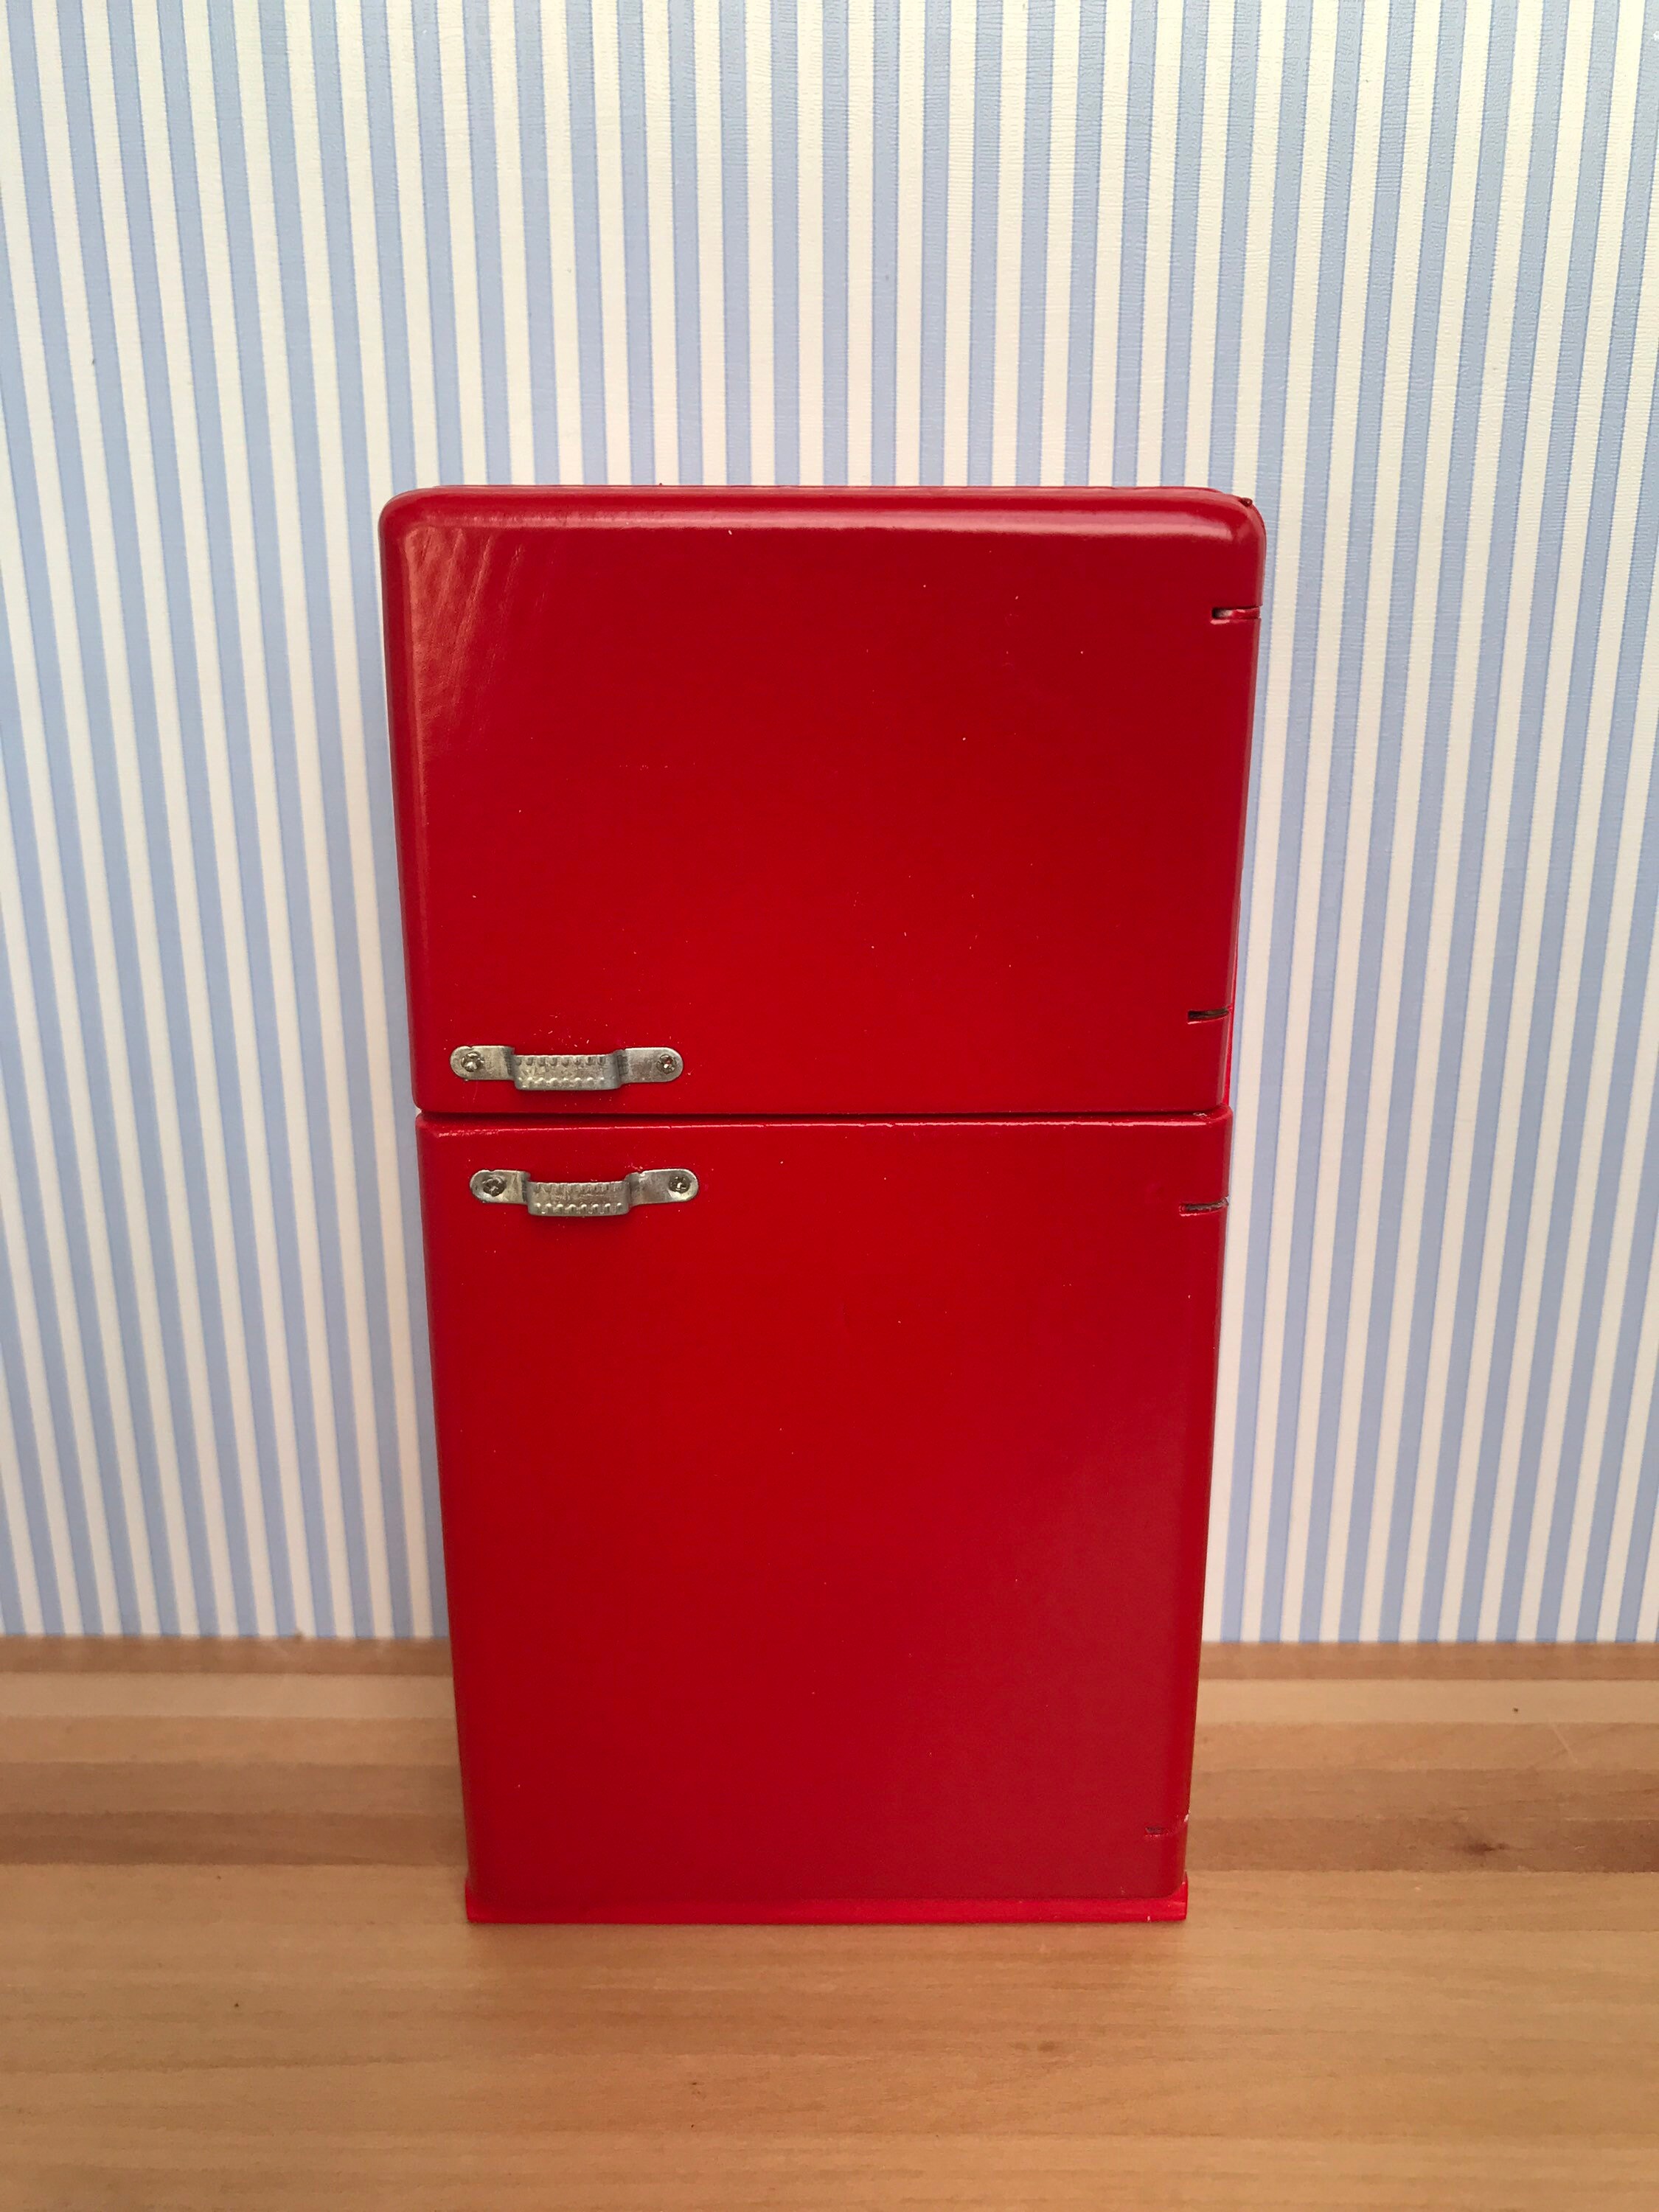 1:12 Scale Red Kitchen Set Fridge Stove Oven Sink Cabinet